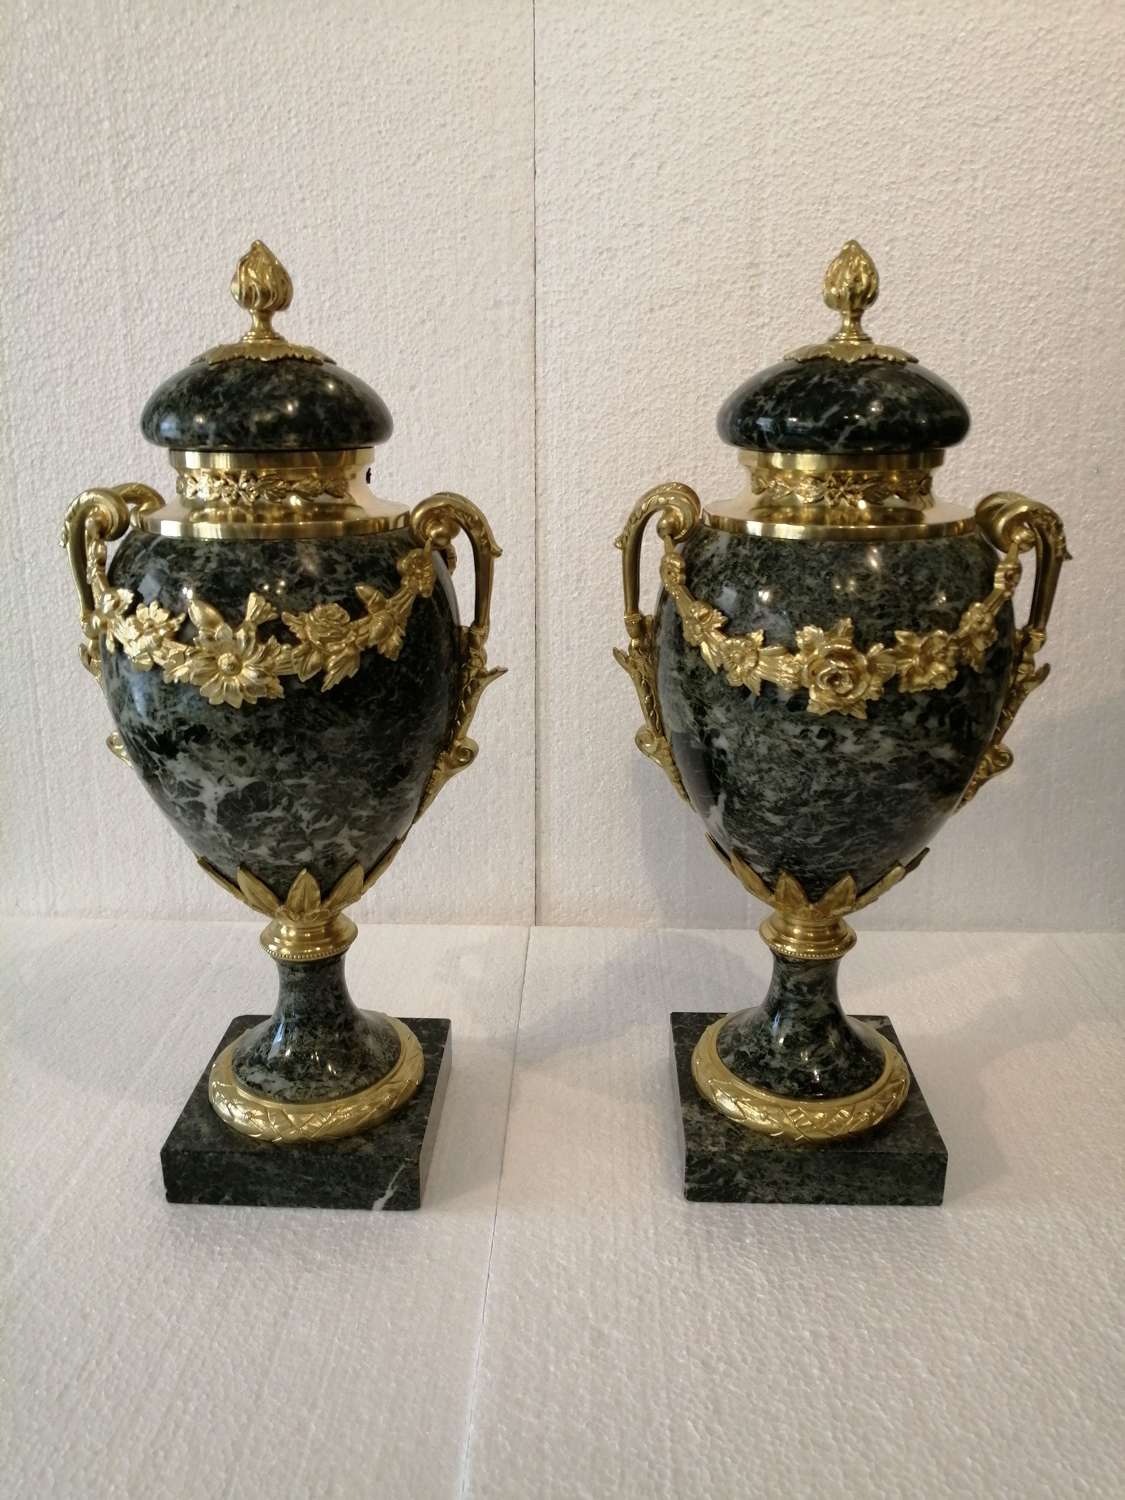 A beautiful pair of marble cassolettes